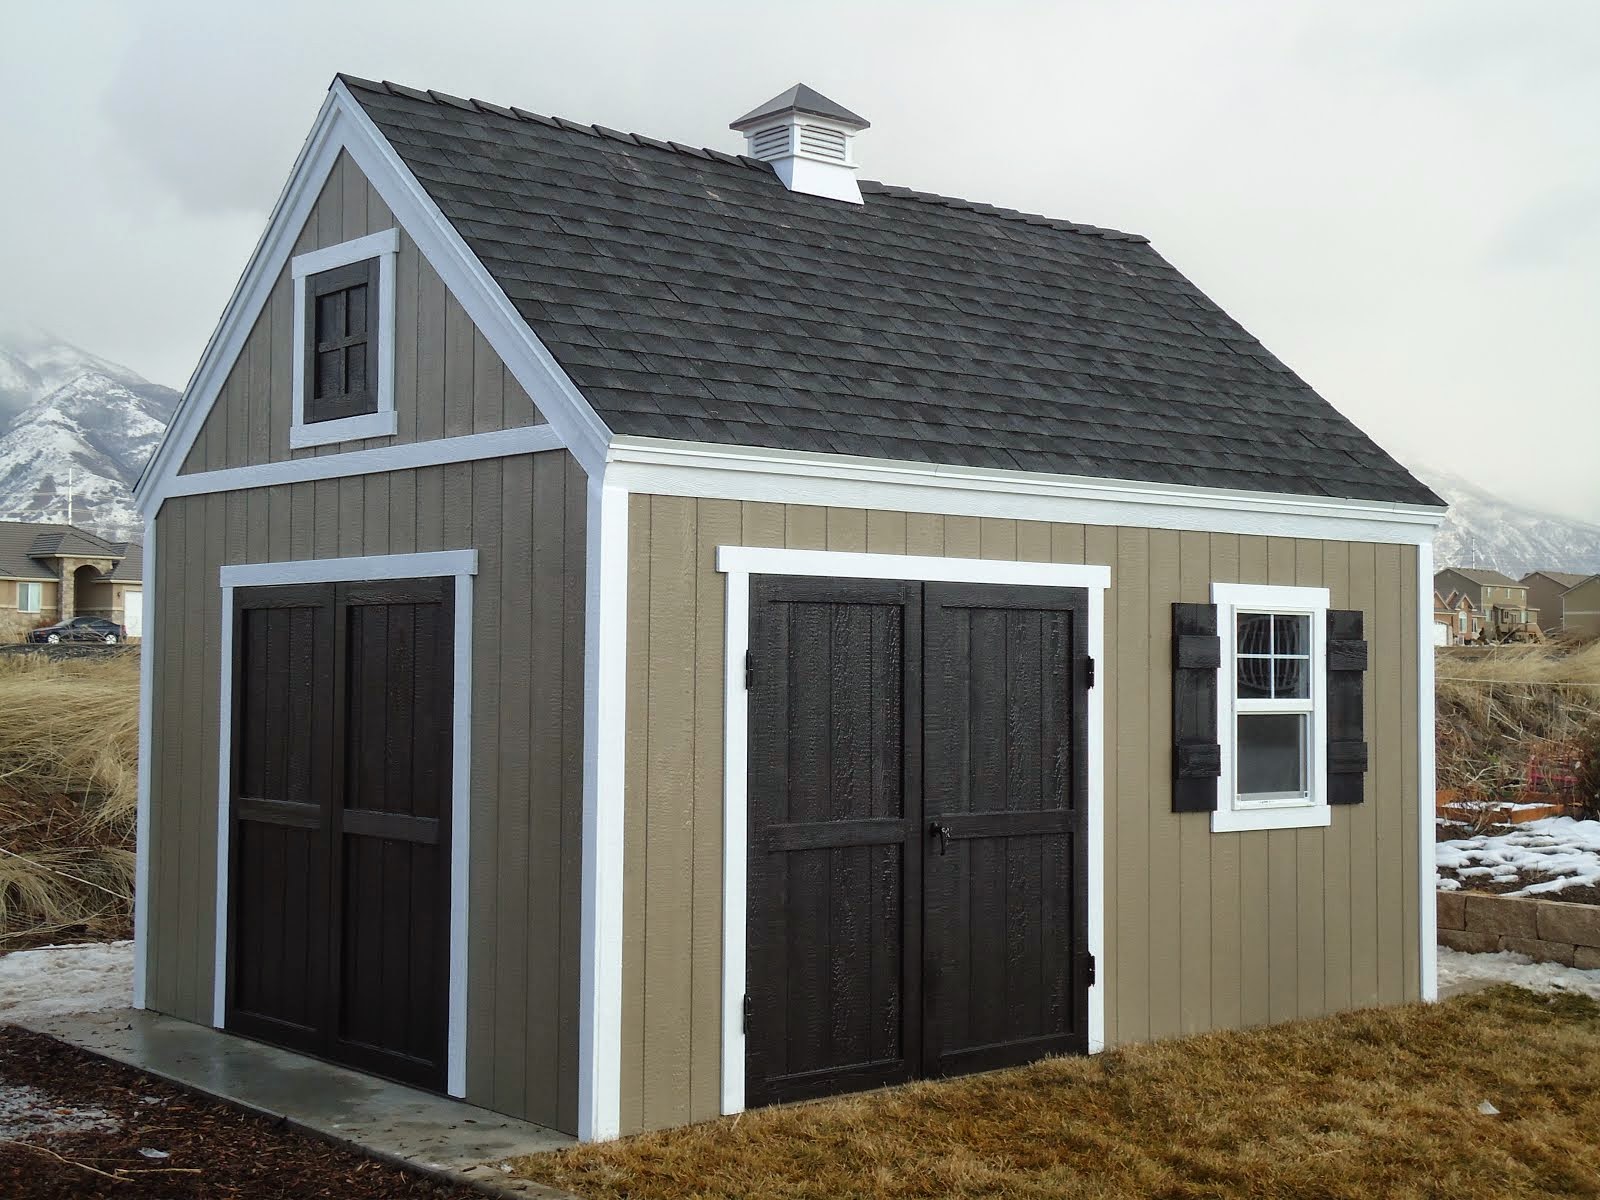 Custom Sheds, Garages, Chicken Coops, Pergolas and Kits